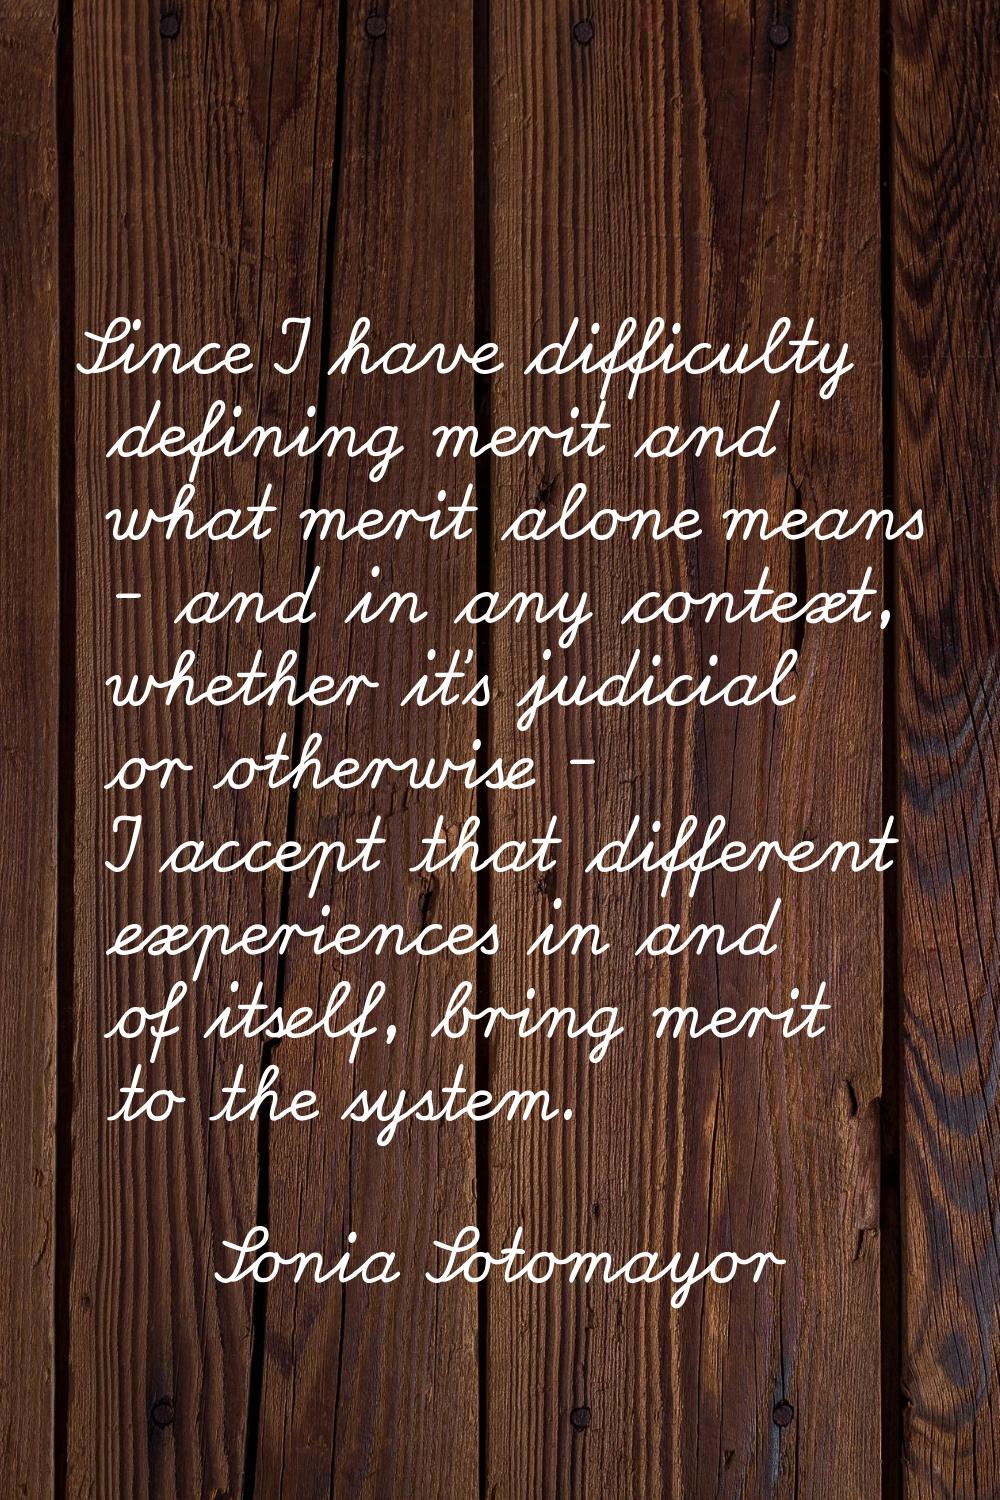 Since I have difficulty defining merit and what merit alone means - and in any context, whether it'